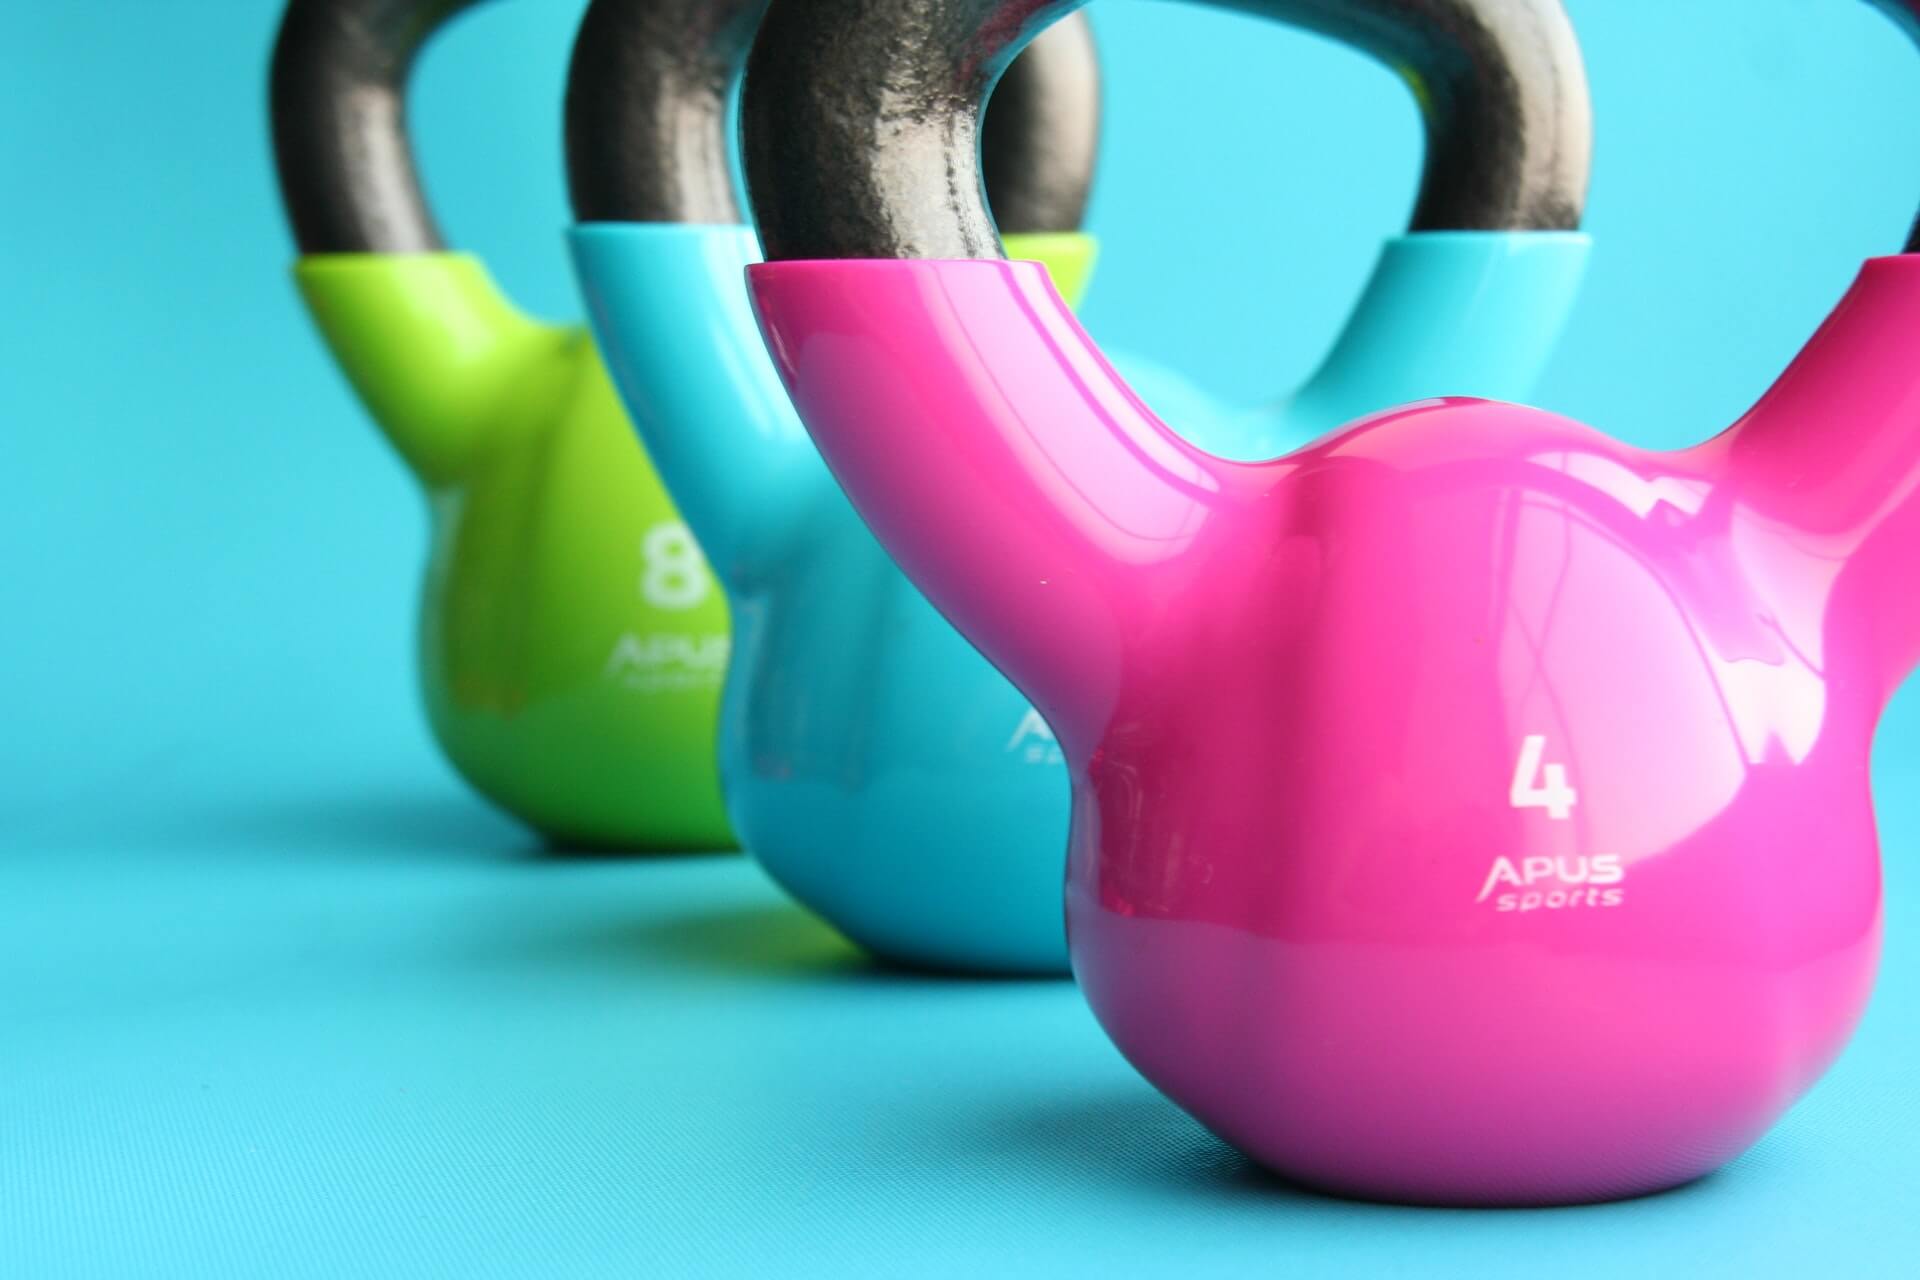 three brightly colored kettle bells on a bright blue surface